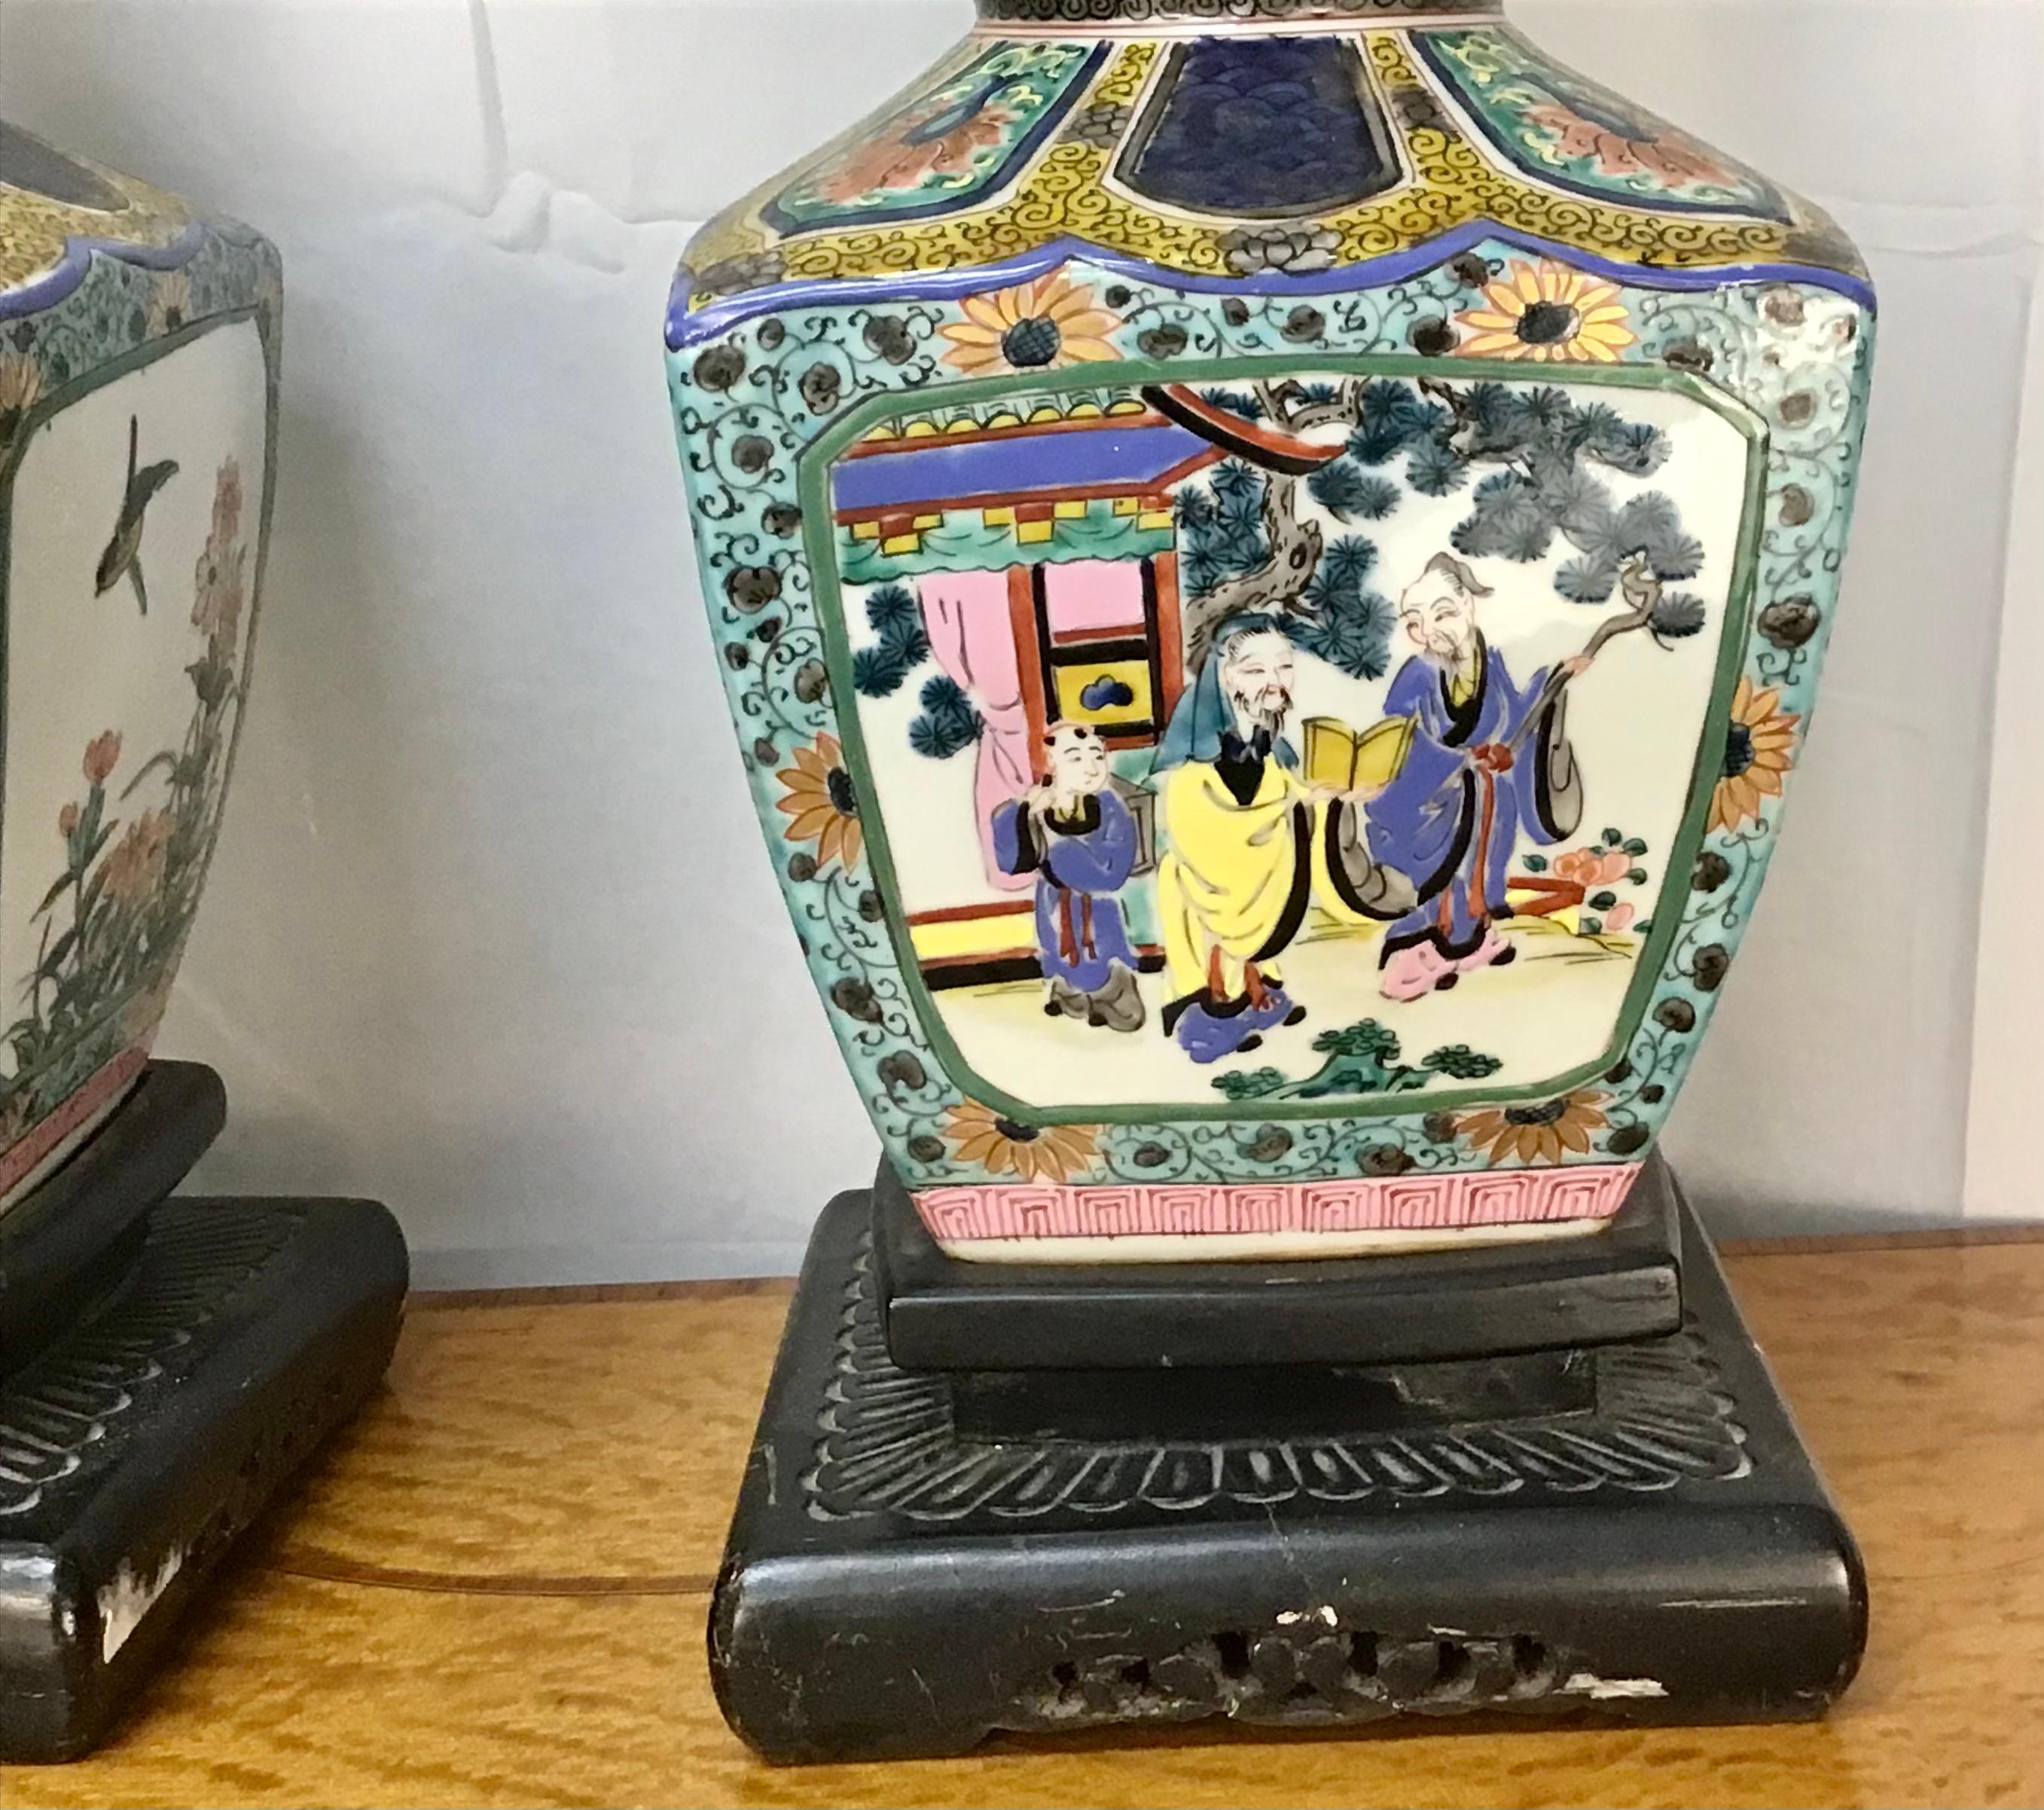 Rare pair decorated with court figures engaged in leisurely pursuits, on carved wood bases. Bright vivid and colorfully hand painted motif. Please note shade is not included.